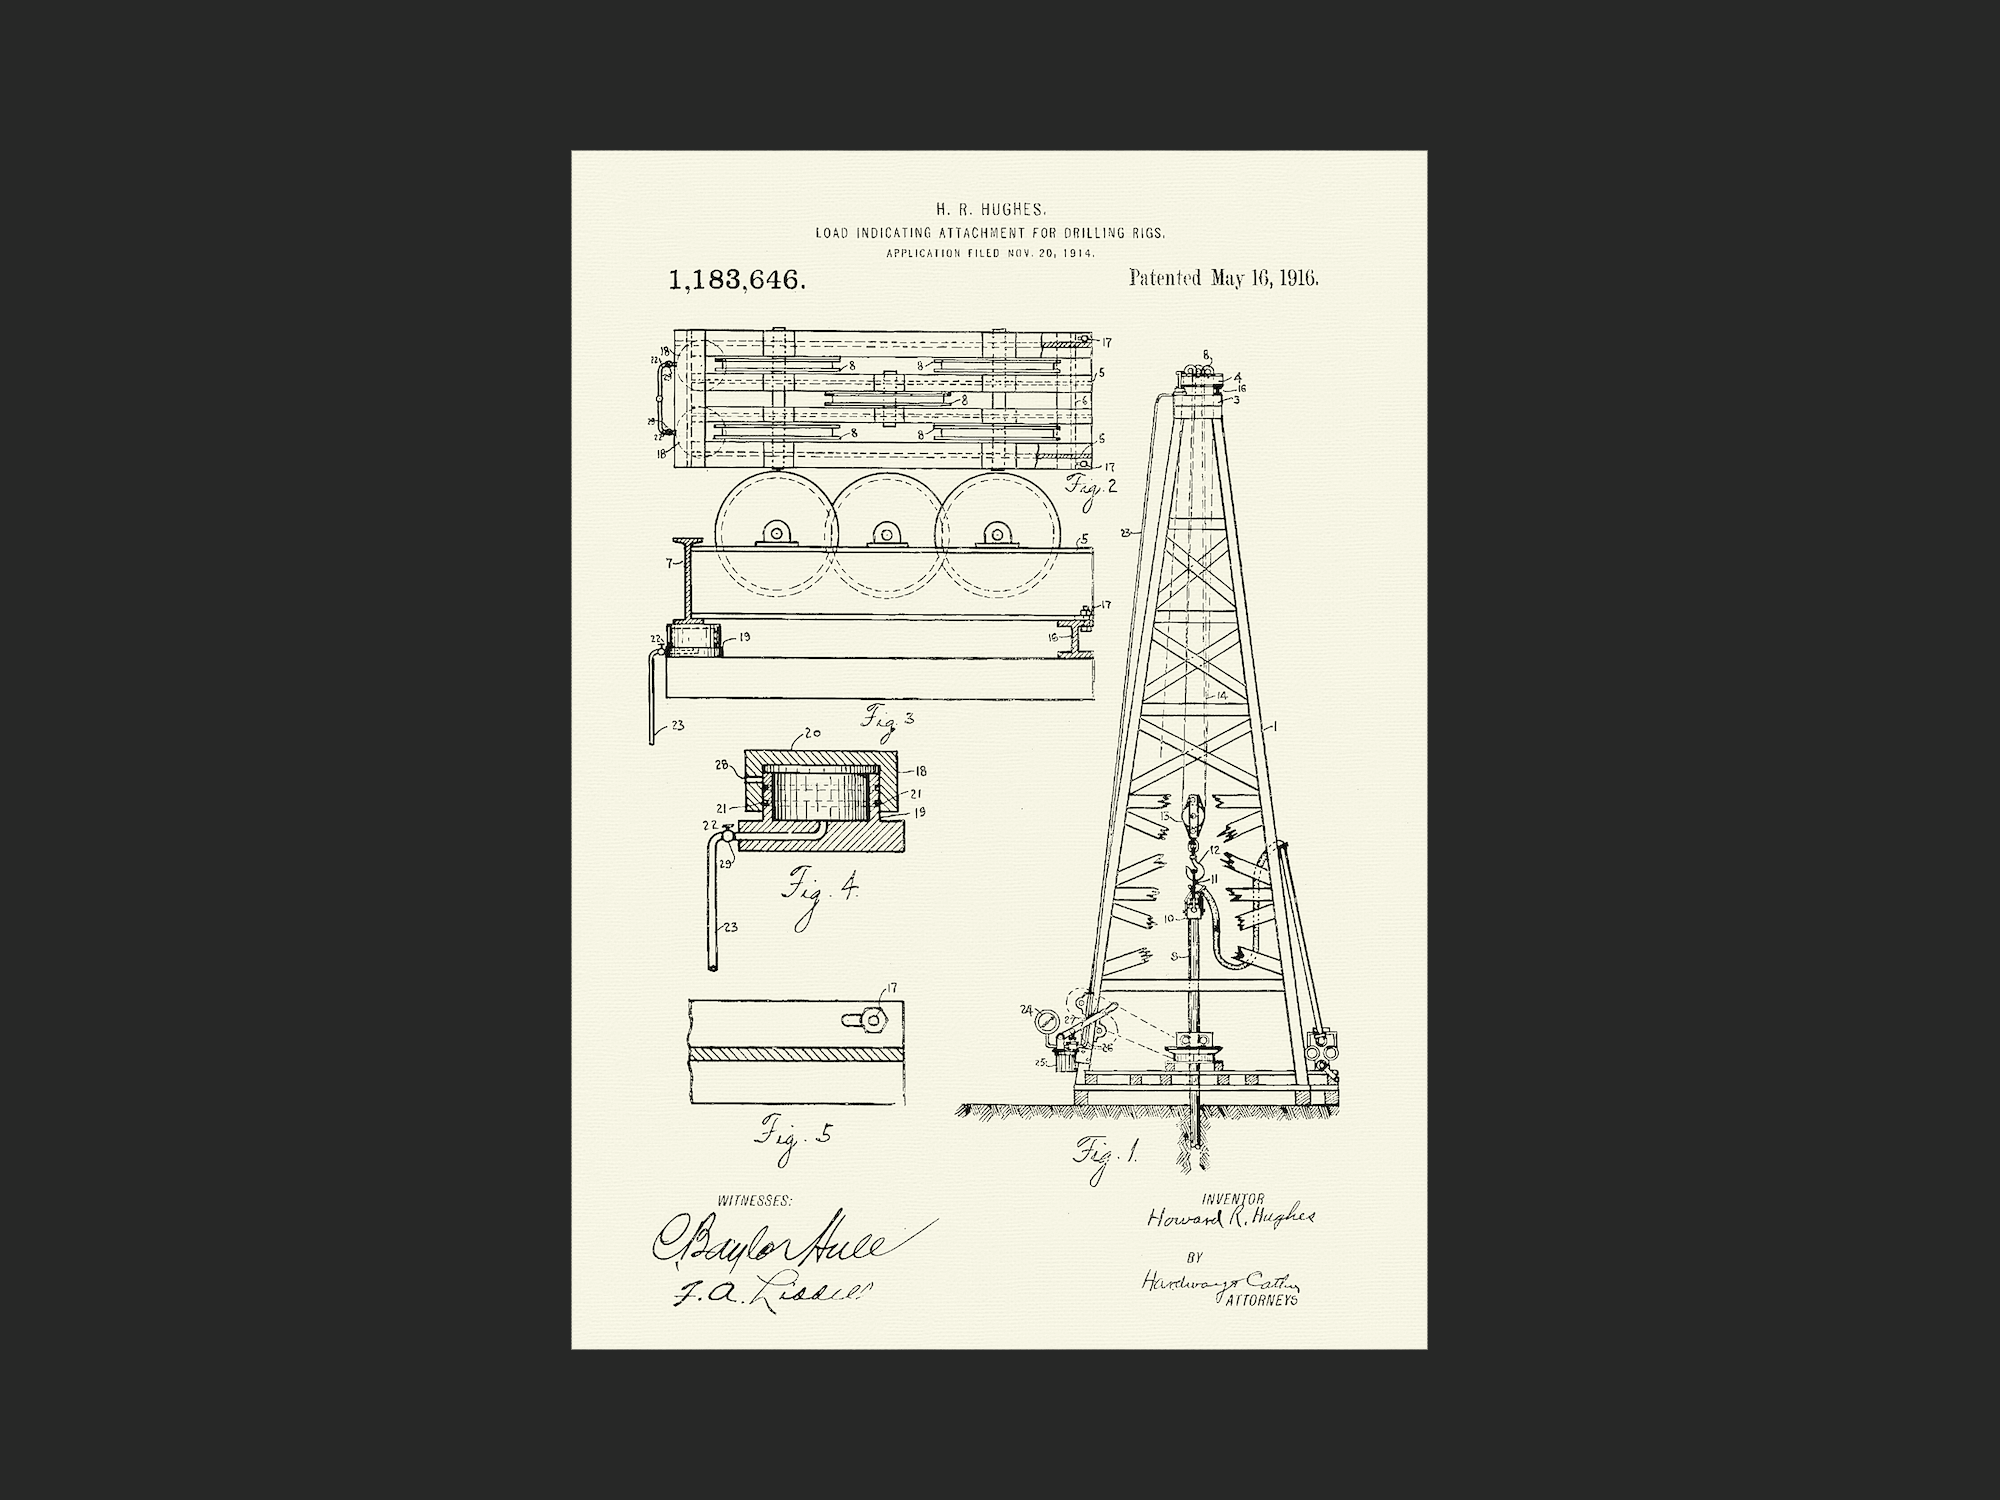 A 1914 patent secured by Howard R. Hughes Sr., CEO of the Sharp-Hughes Tool Company, for a drilling rig load indicator. At the time of filing, Sharp-Hughes was expanding rapidly due to the success of the company’s two-cone rotary drill bit, which revolutionized oil drilling in the US. Later renamed the Hughes Tool Company, the firm served as the financial foundation for Hughes’ more famous son to develop his business empire. Hughes Tool Company is a corporate ancestor of Baker Hughes (NYSE: BKR), which announced second-quarter earnings this week, registering below consensus forecasts, despite a 14 percent year-over-year growth in oilfield services revenues.